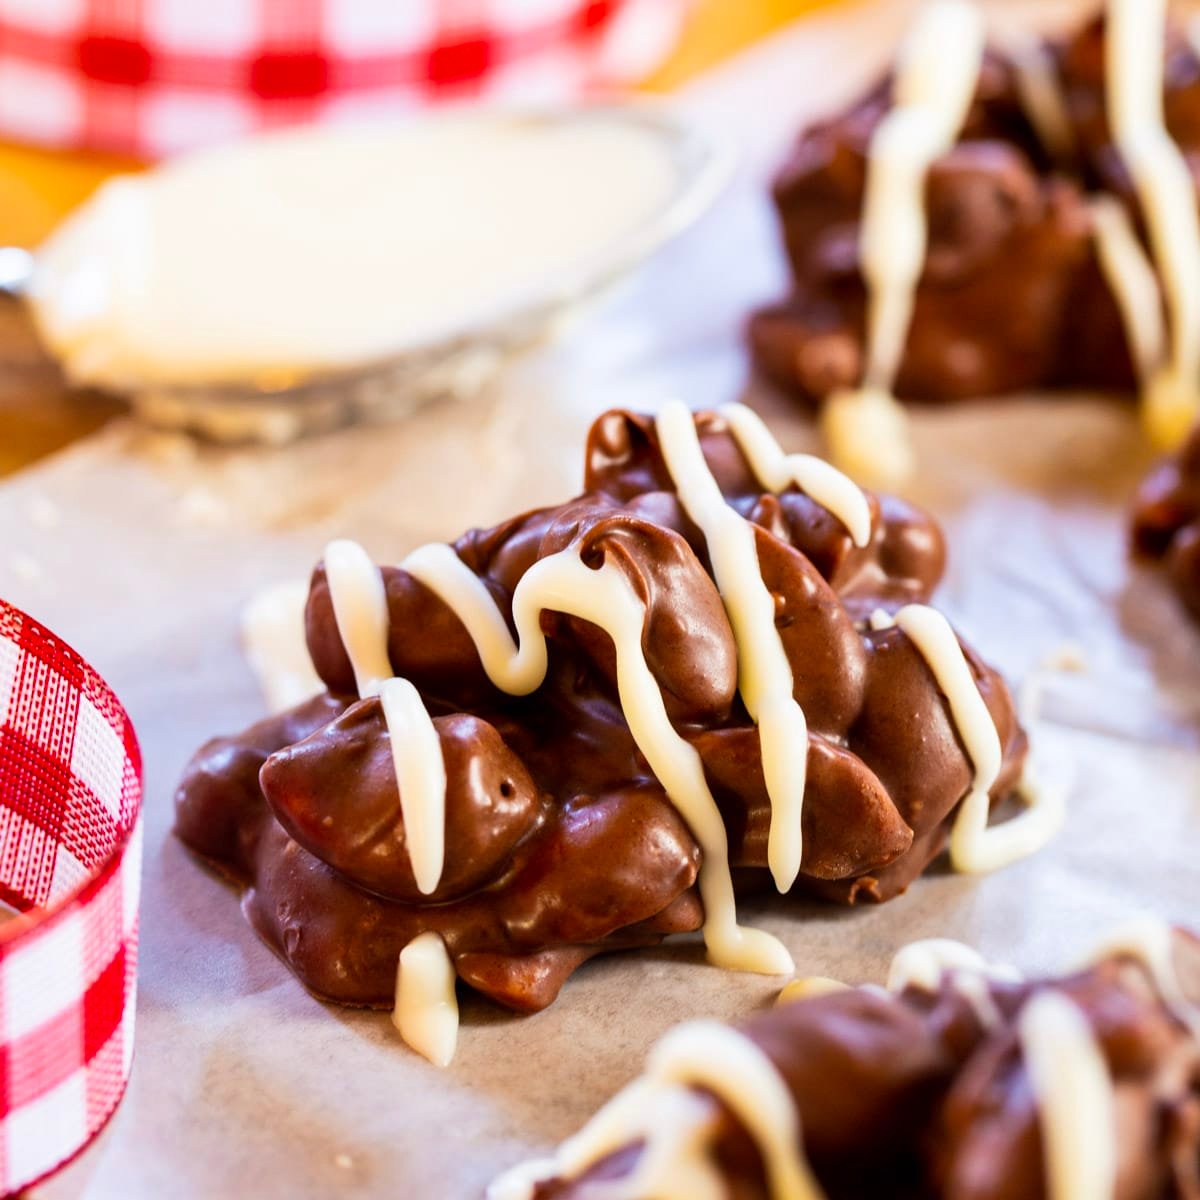 Crock Pot Nut Clusters with white chocolate drizzle.